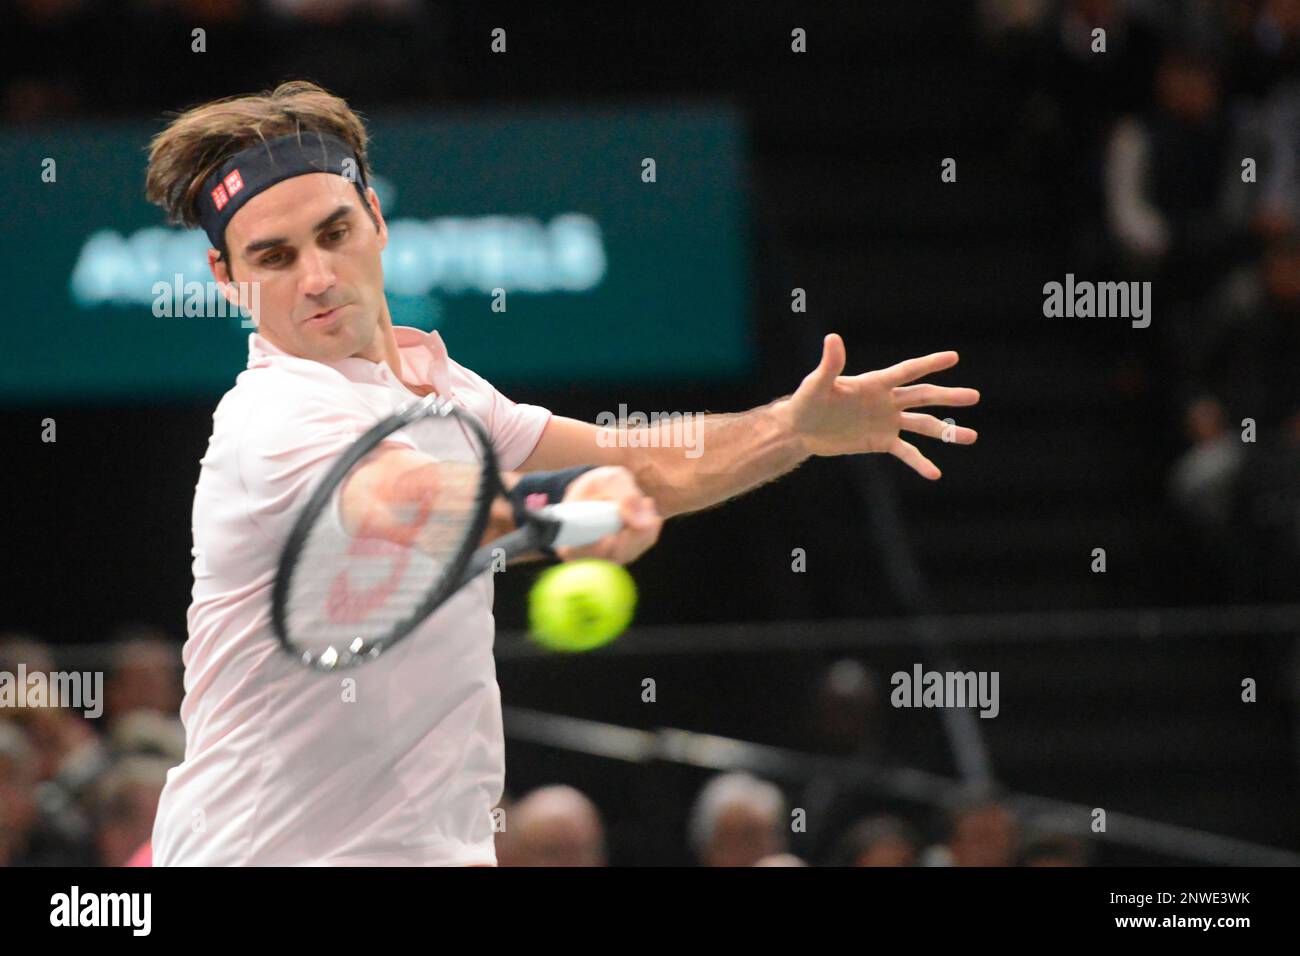 November 1, 2018 - Paris, France - ROGER FEDERER of Switzerland in his  third round match in the Rolex Paris Masters tennis tournament in Paris  France. (Credit Image: © Christopher Levy/ZUMA Wire) (